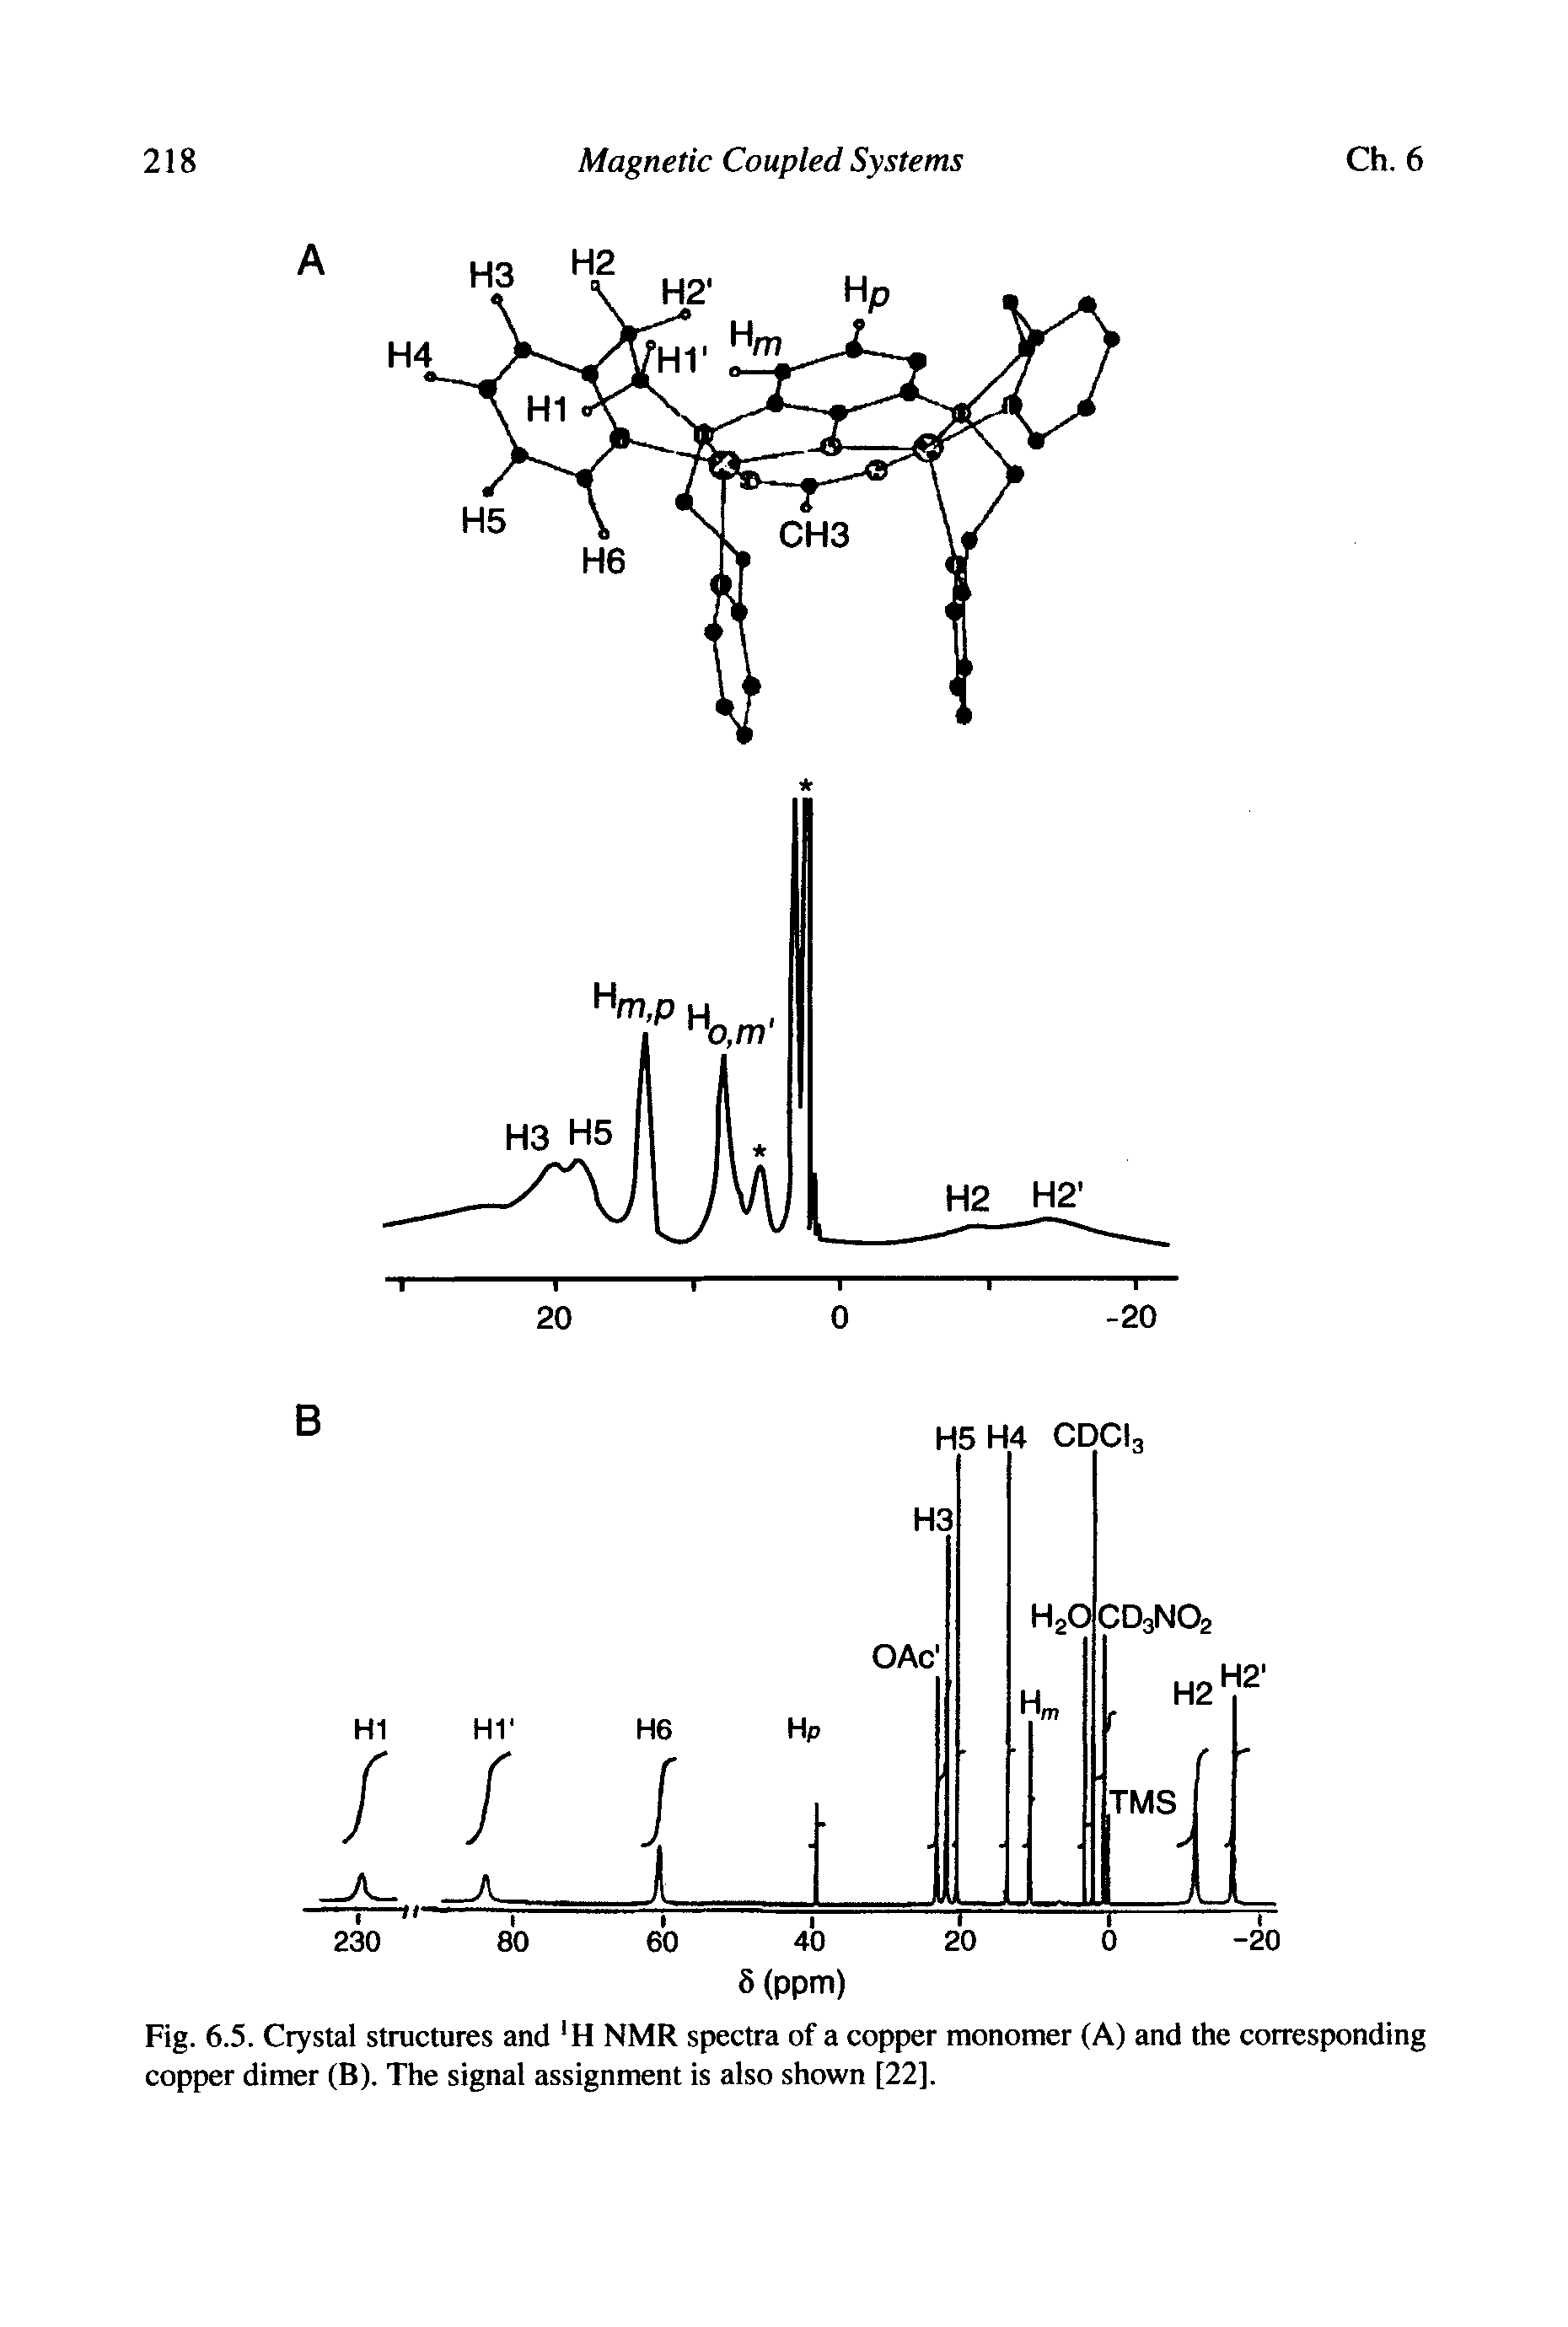 Fig. 6.5. Crystal structures and H NMR spectra of a copper monomer (A) and the corresponding copper dimer (B). The signal assignment is also shown [22].